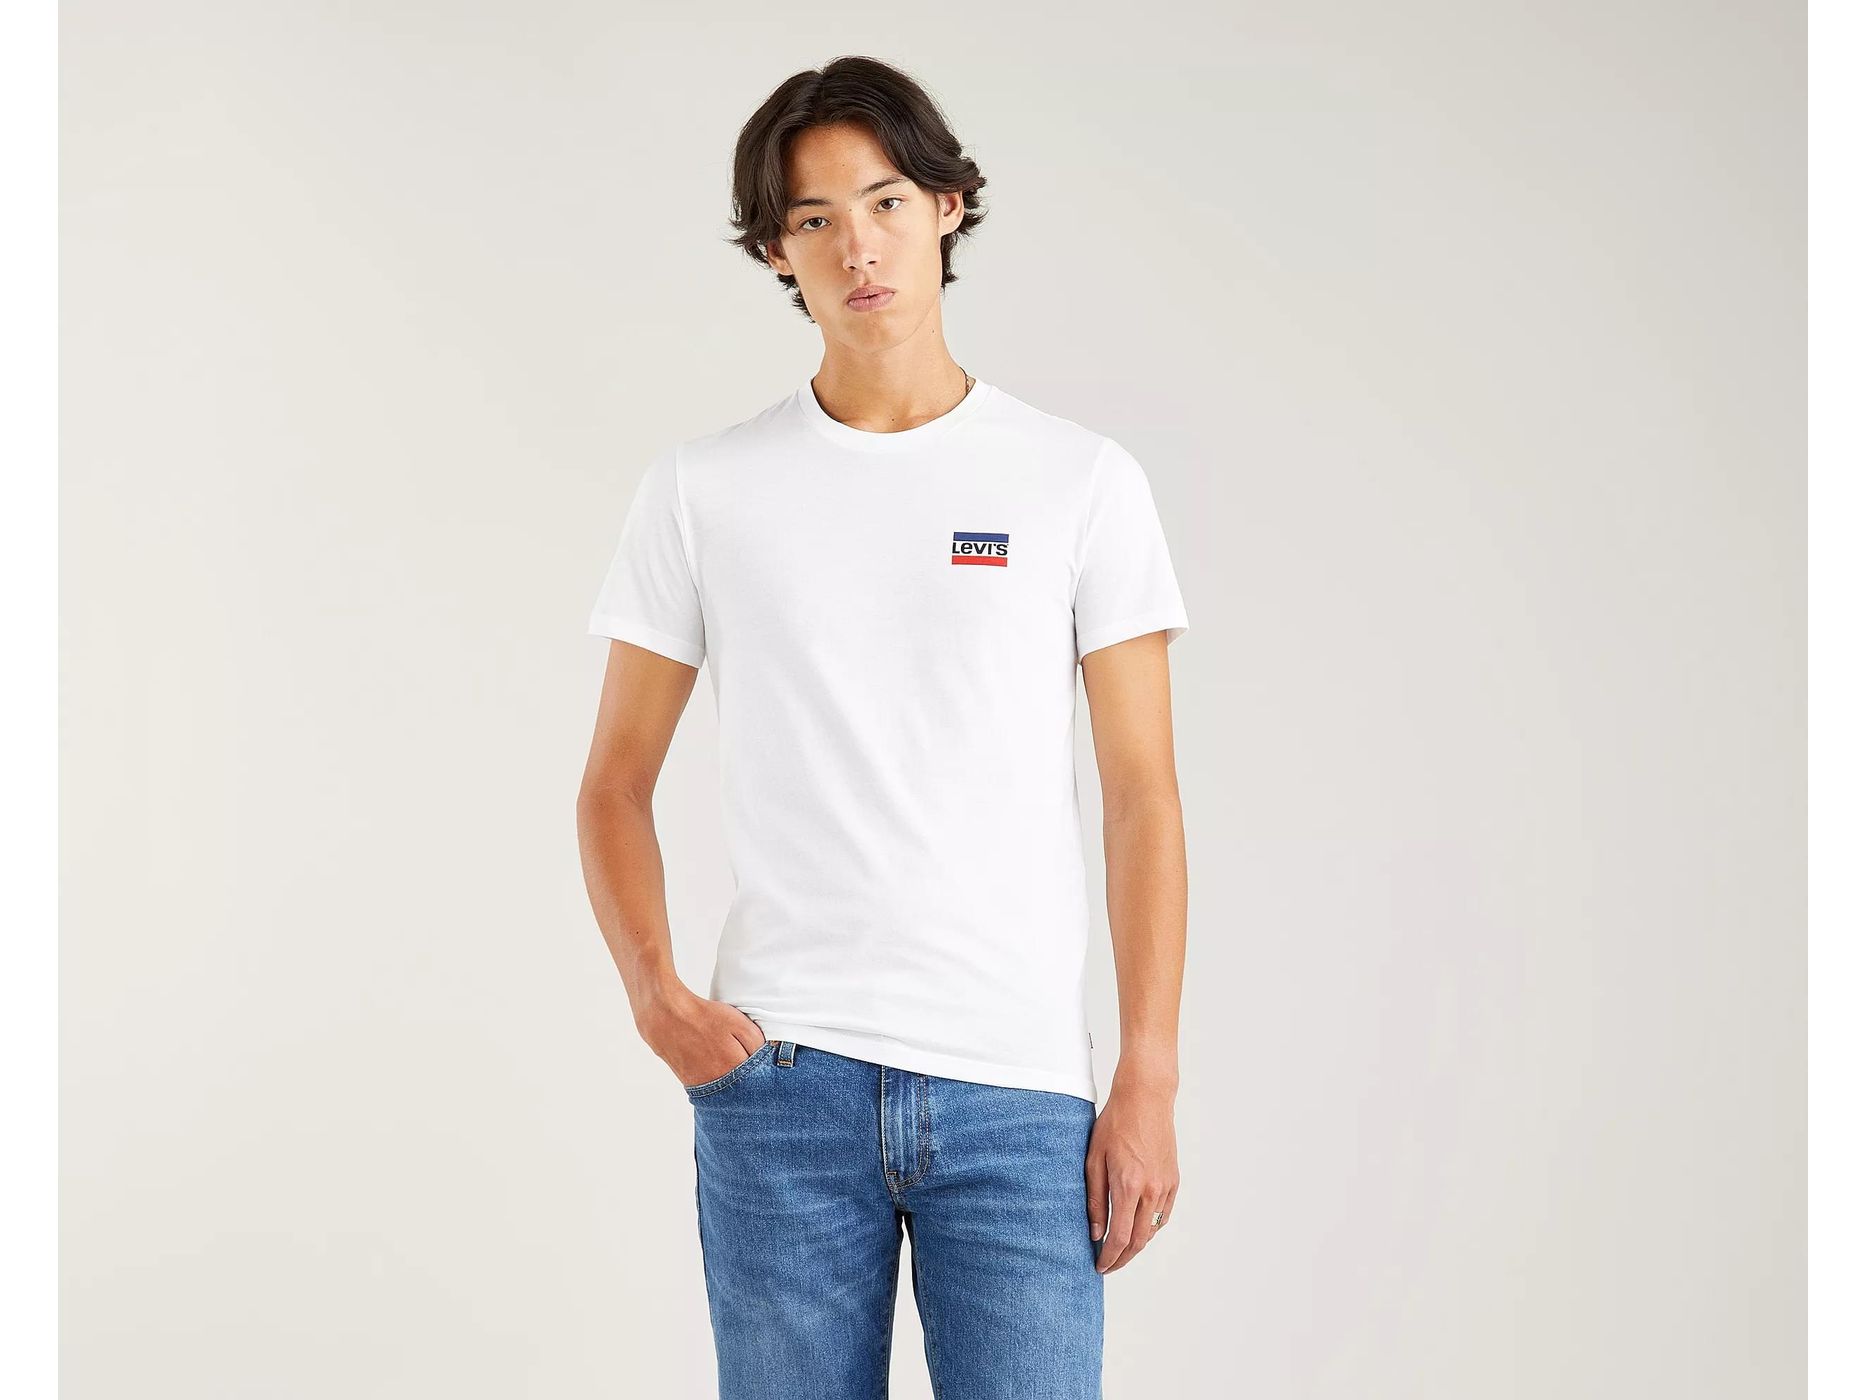 The Graphic Tee - 2 pack - Levi's